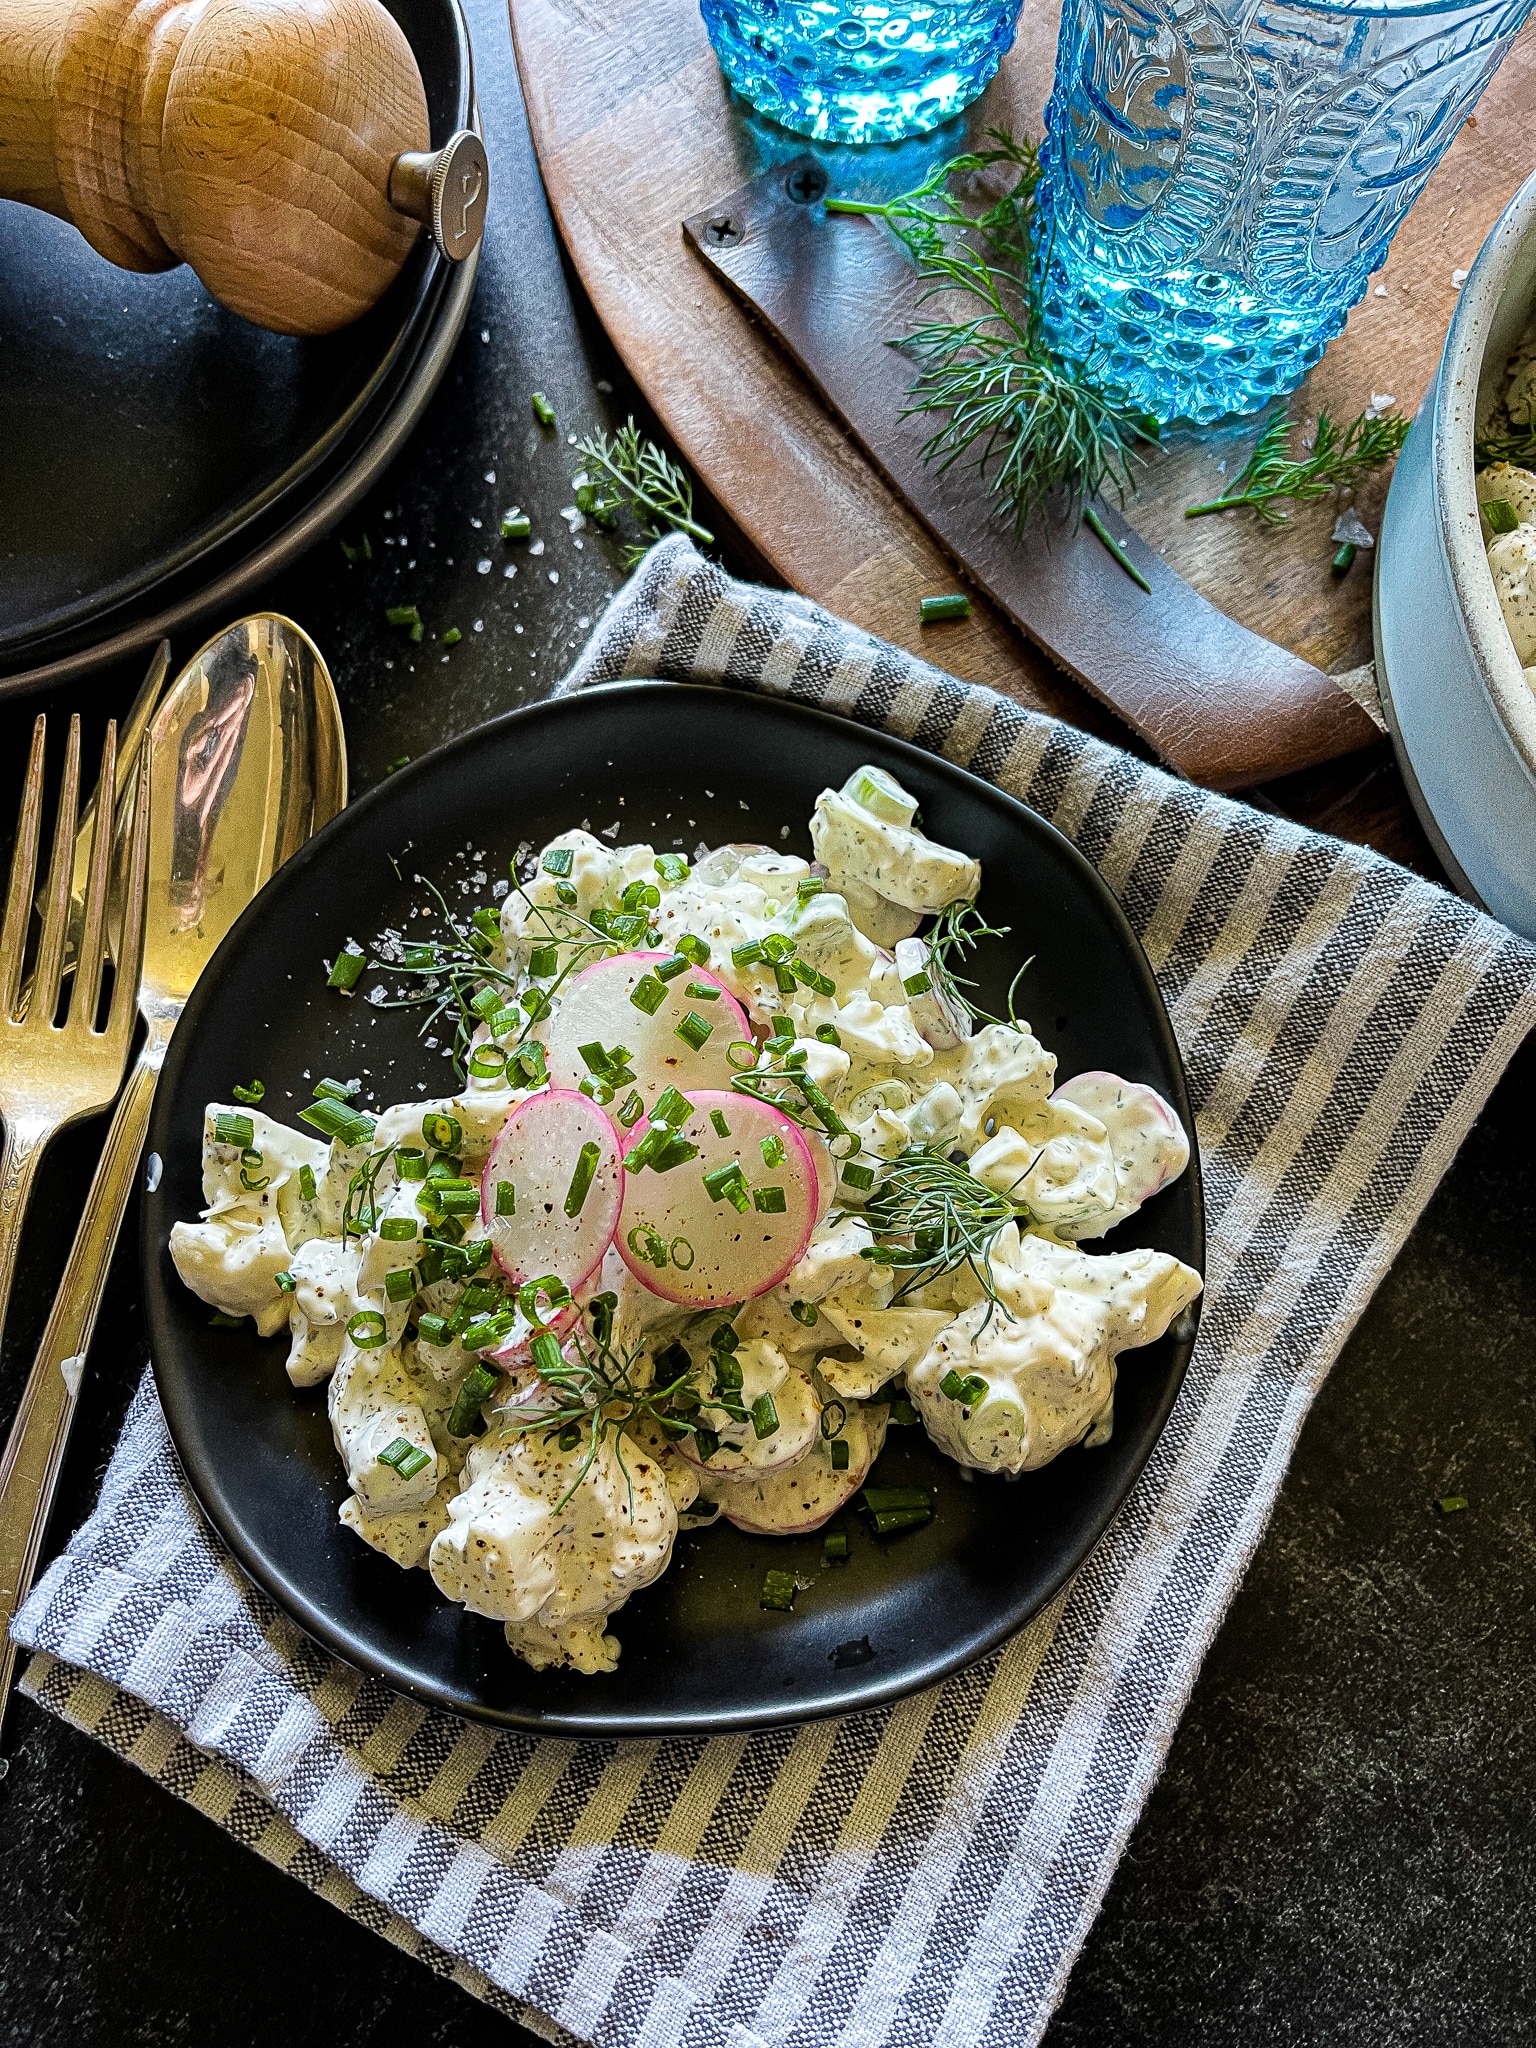 radish salad with cauliflower and green onion, garnished with chives and dill, in a serving bowl